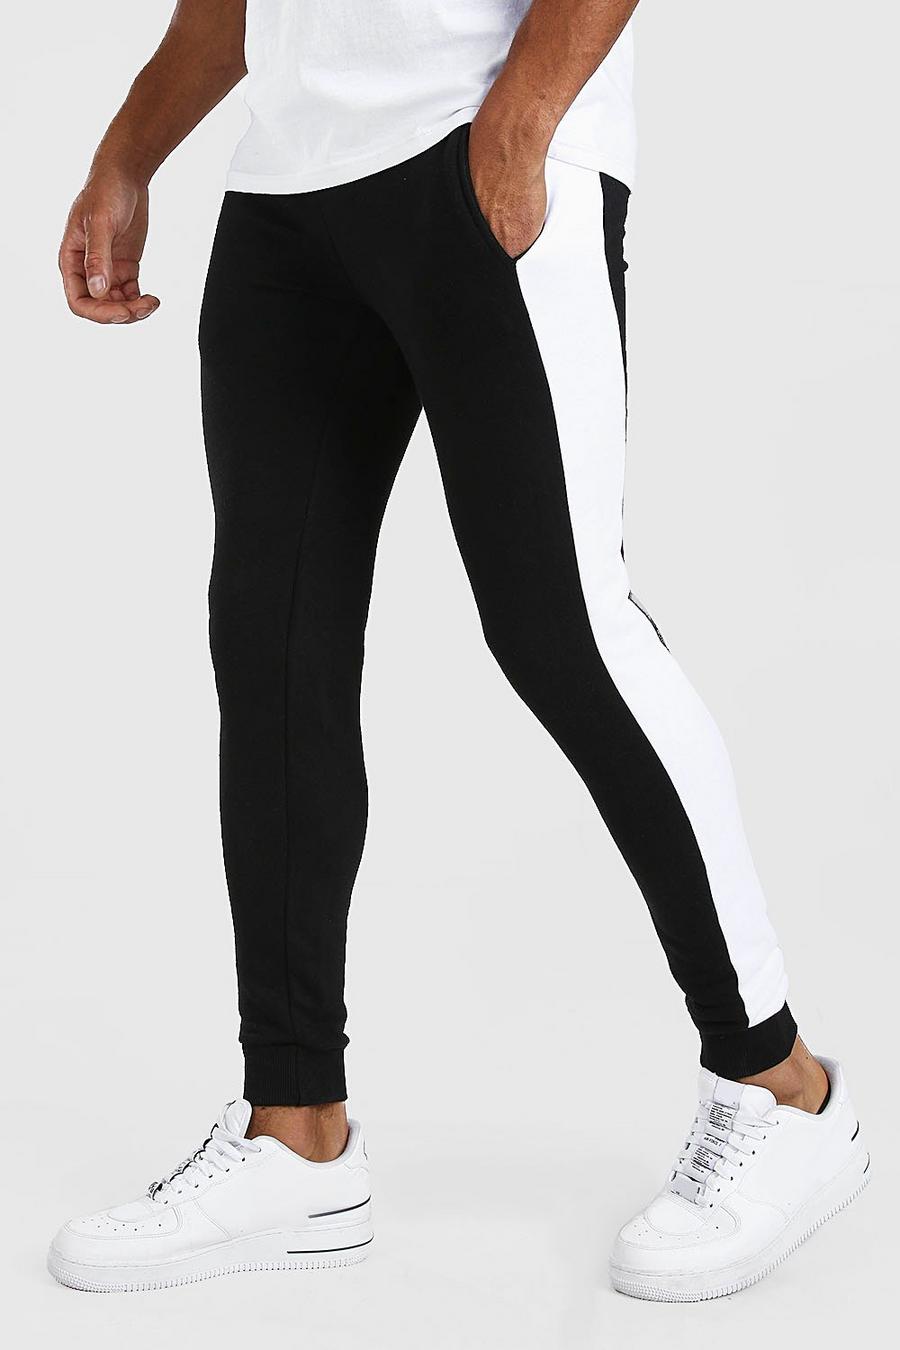 Pantalones de correr superskinny con panel lateral, Negro image number 1